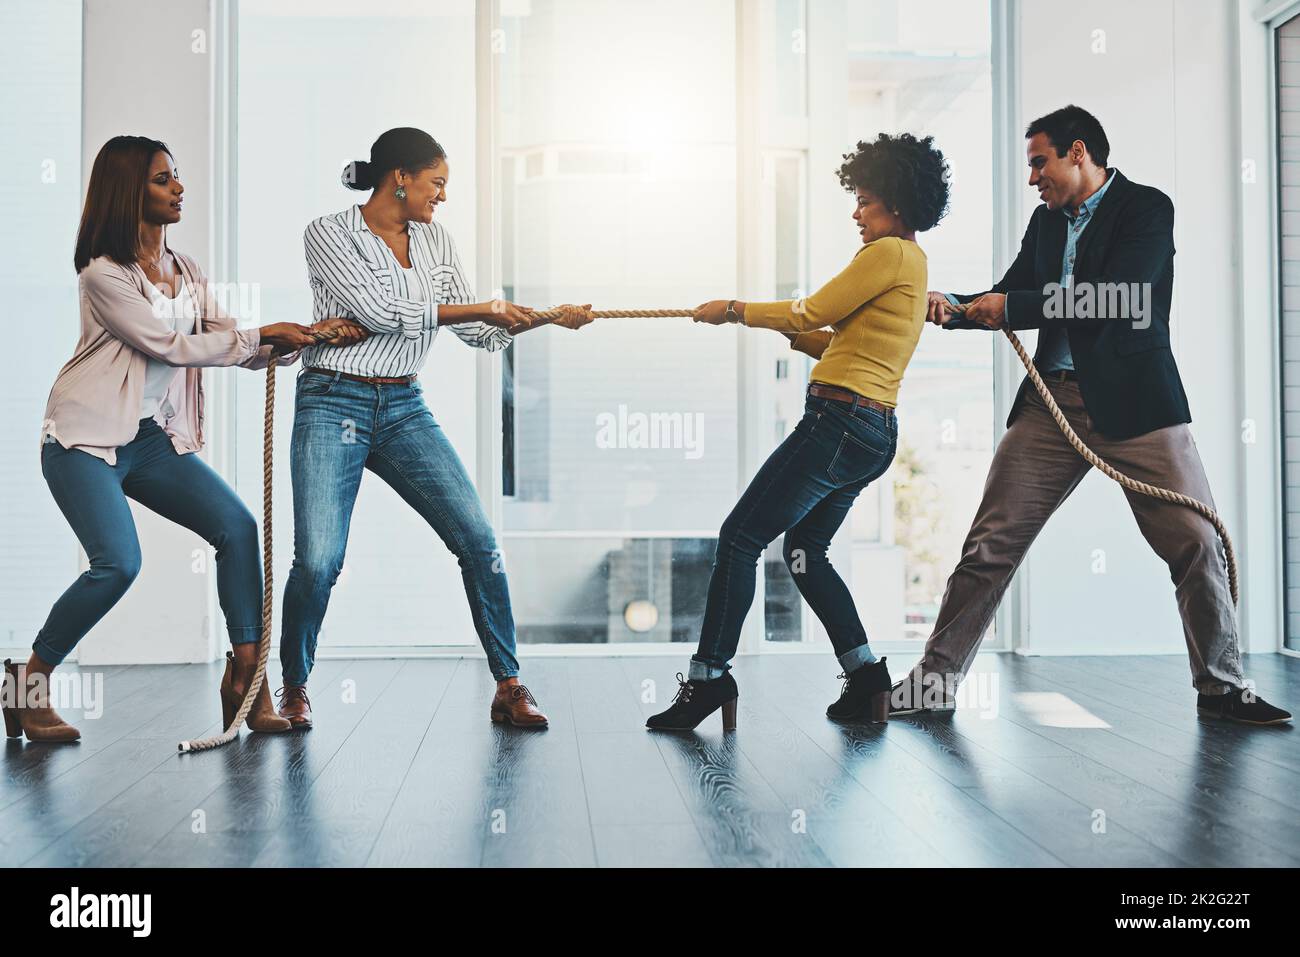 Its a competitive market out there with many challenges. Shot of a group of businesspeople pulling on a rope during tug of war in an office. Stock Photo